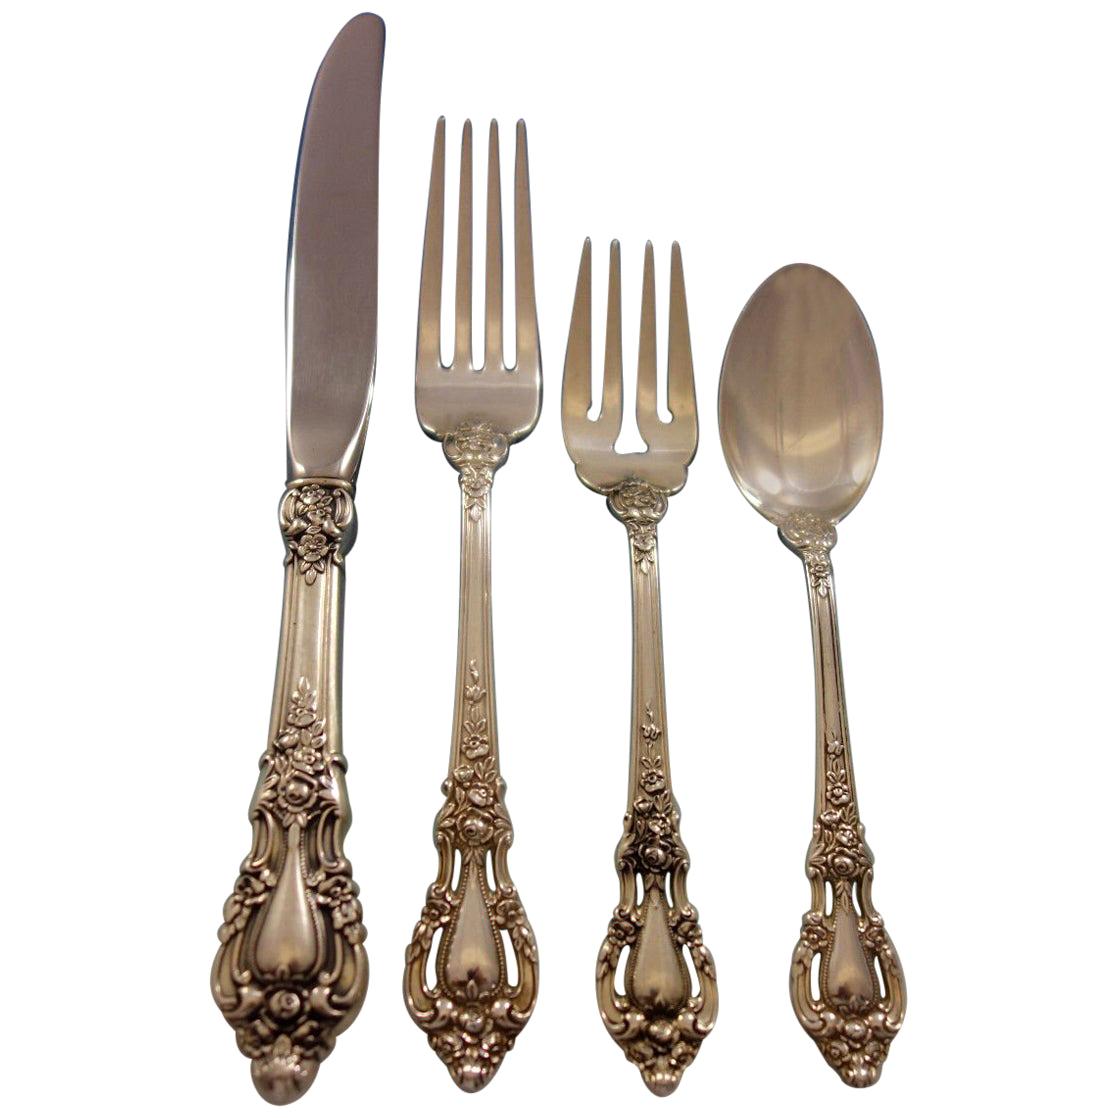 Eloquence by Lunt Sterling Silver Flatware Service for Eight, Set of 34 Pieces